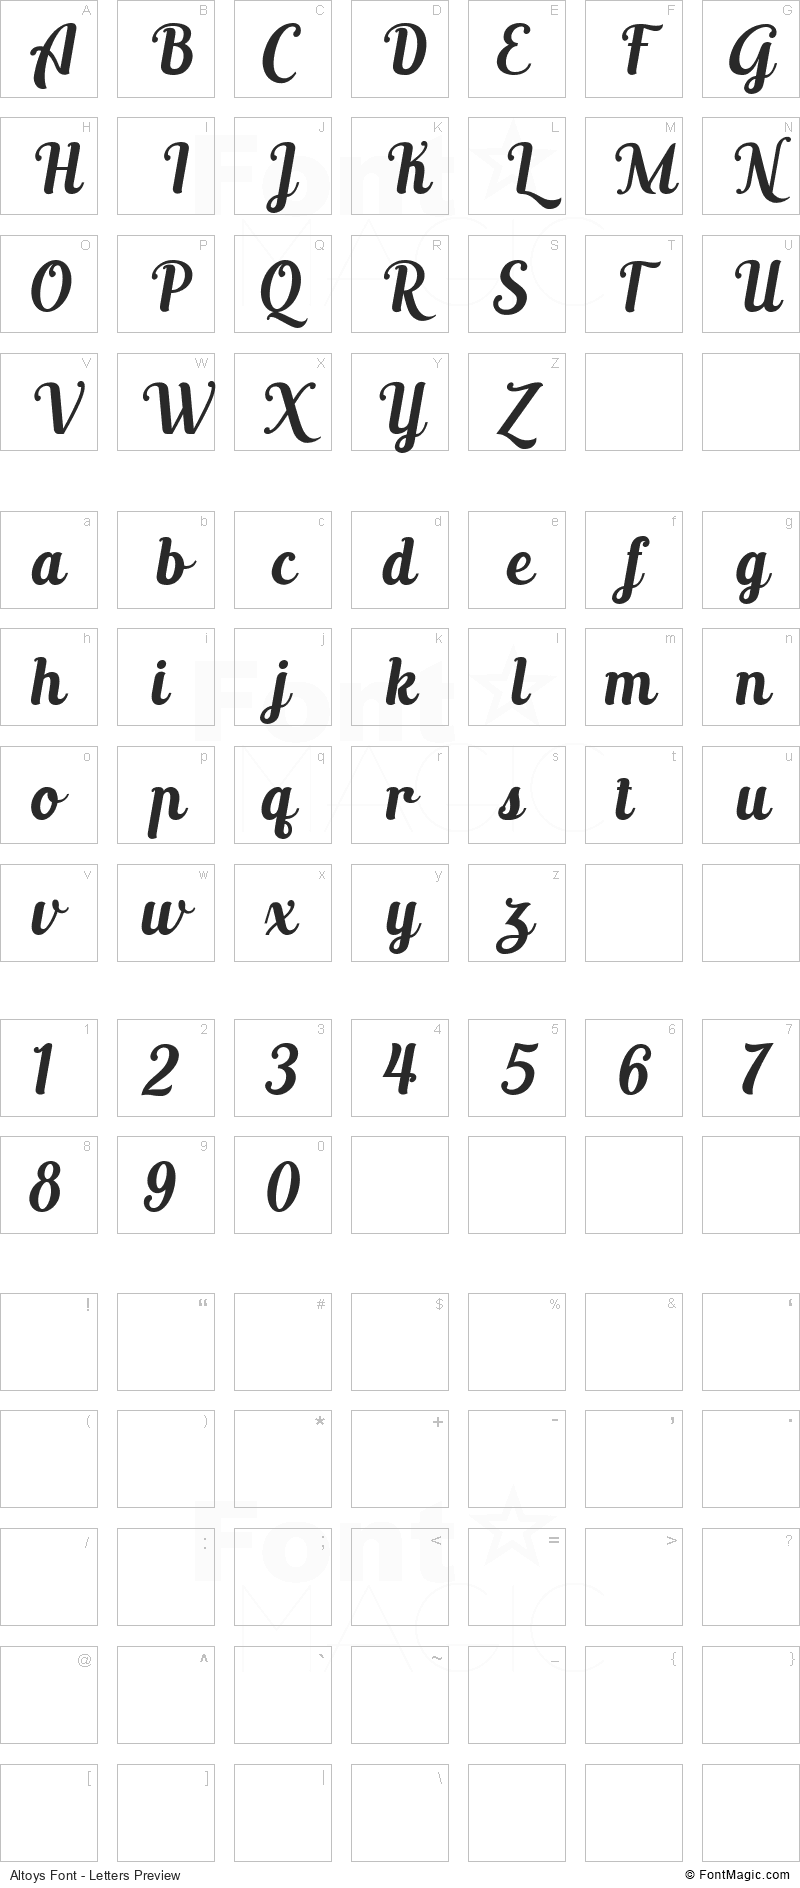 Altoys Font - All Latters Preview Chart